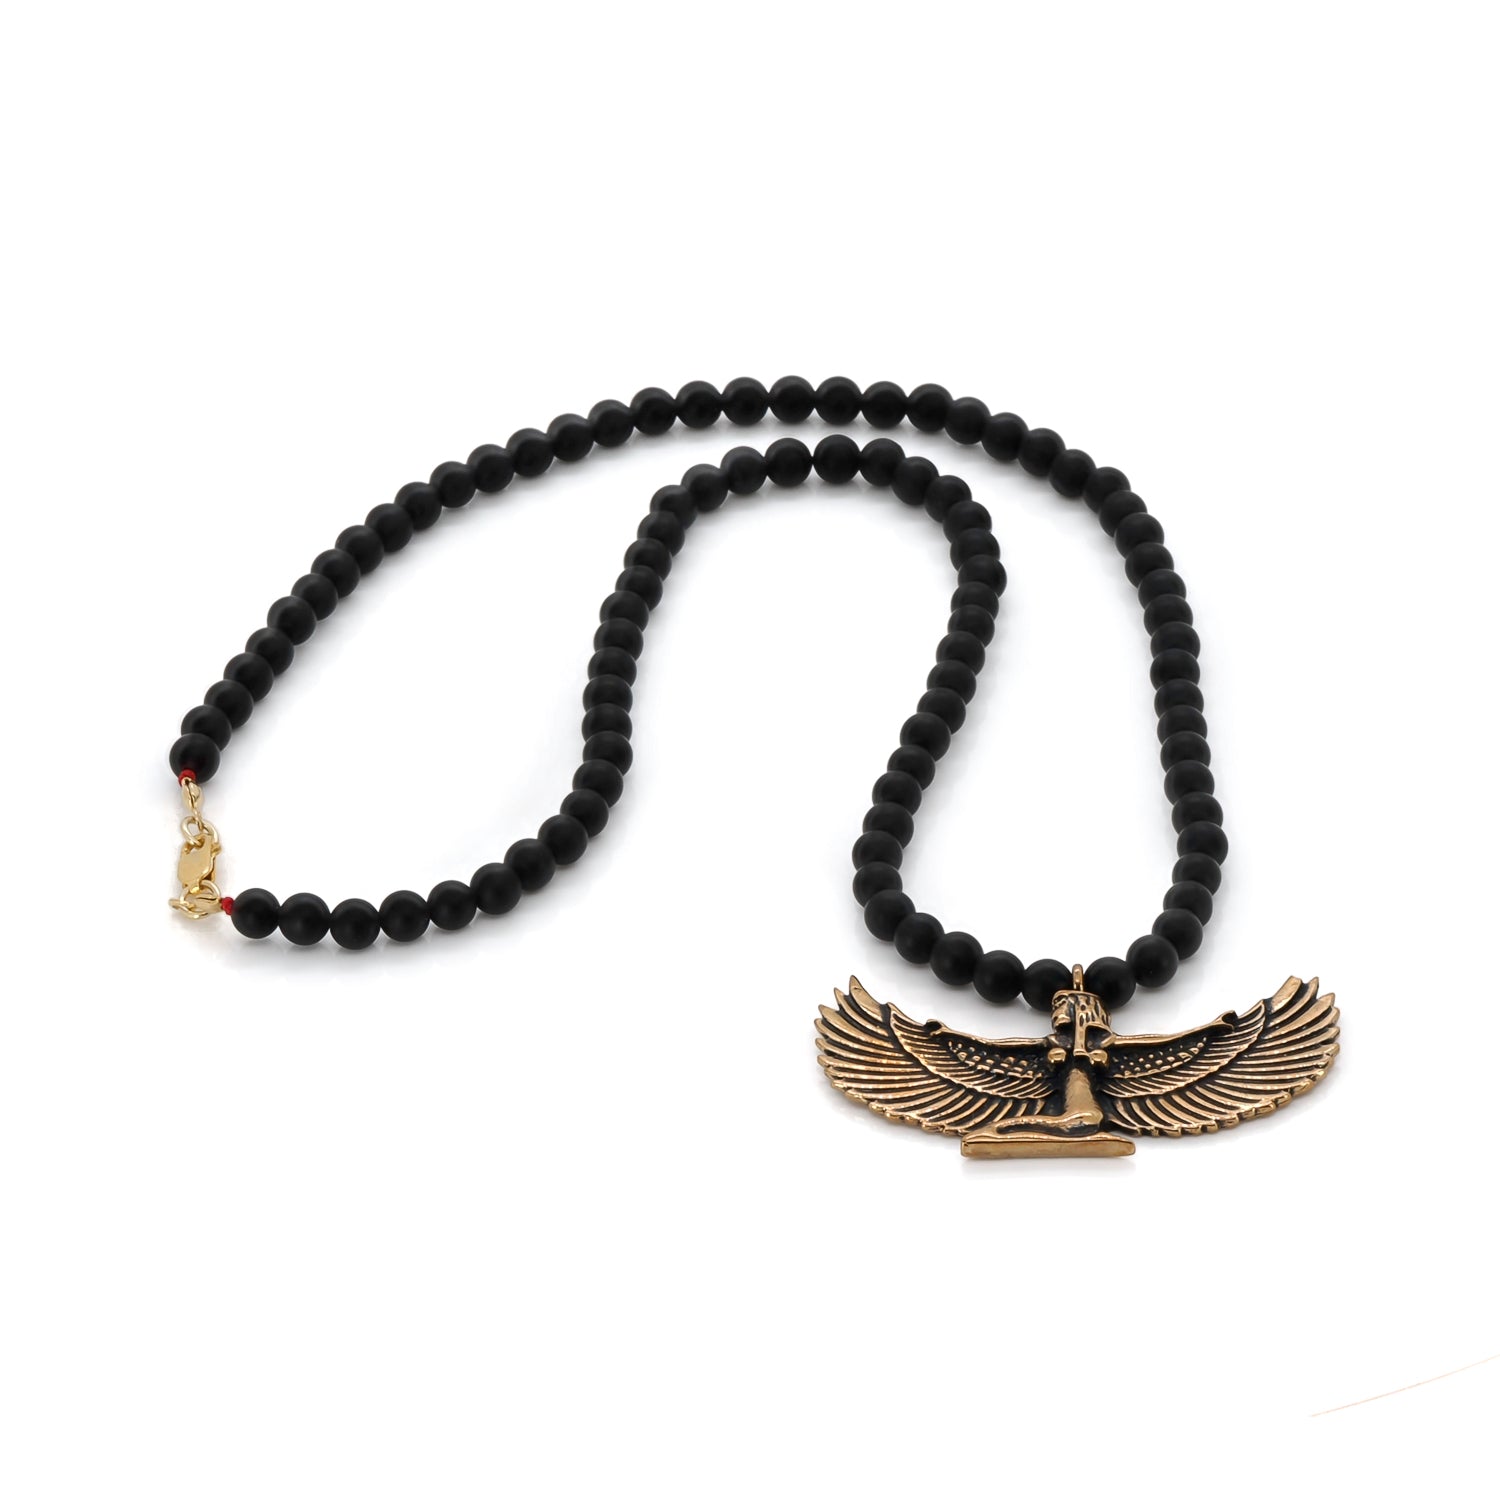 Egyptian Goddess Isis Pendant Necklace with Onyx Beads